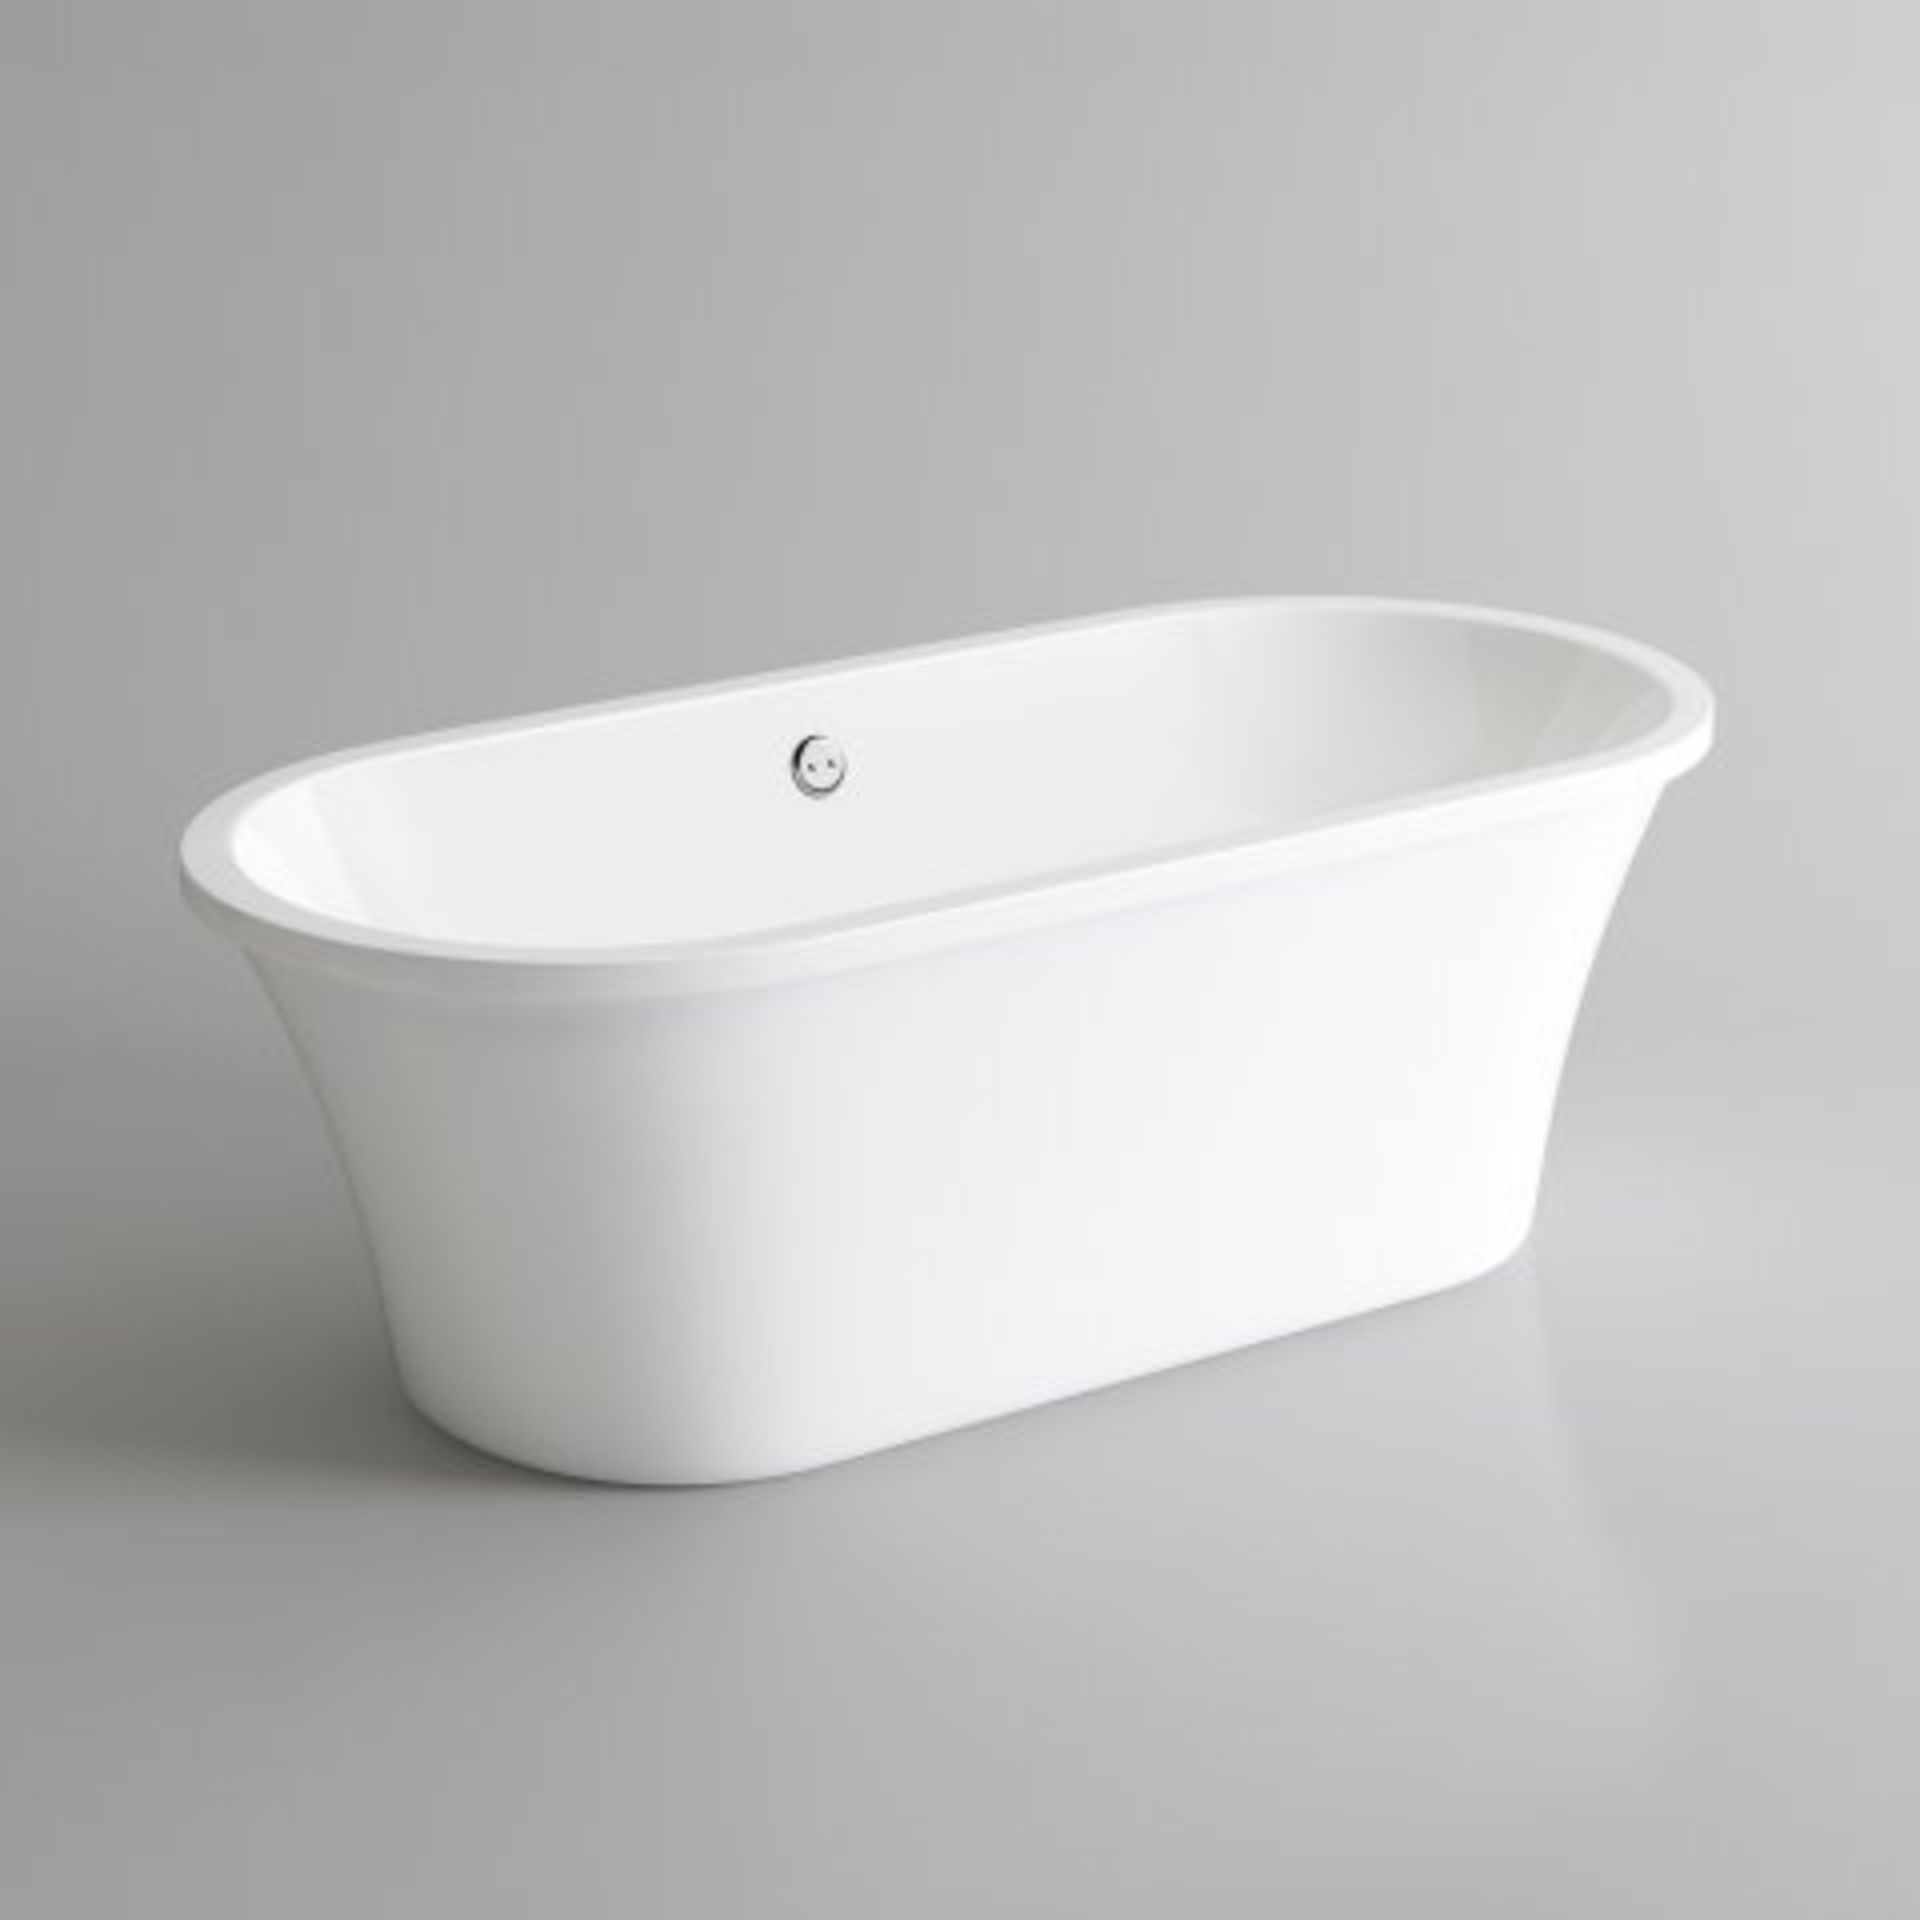 (I13) 1700mm x 800mm Kate Freestanding Bath - Large. Showcasing contemporary clean lines for a - Image 3 of 4